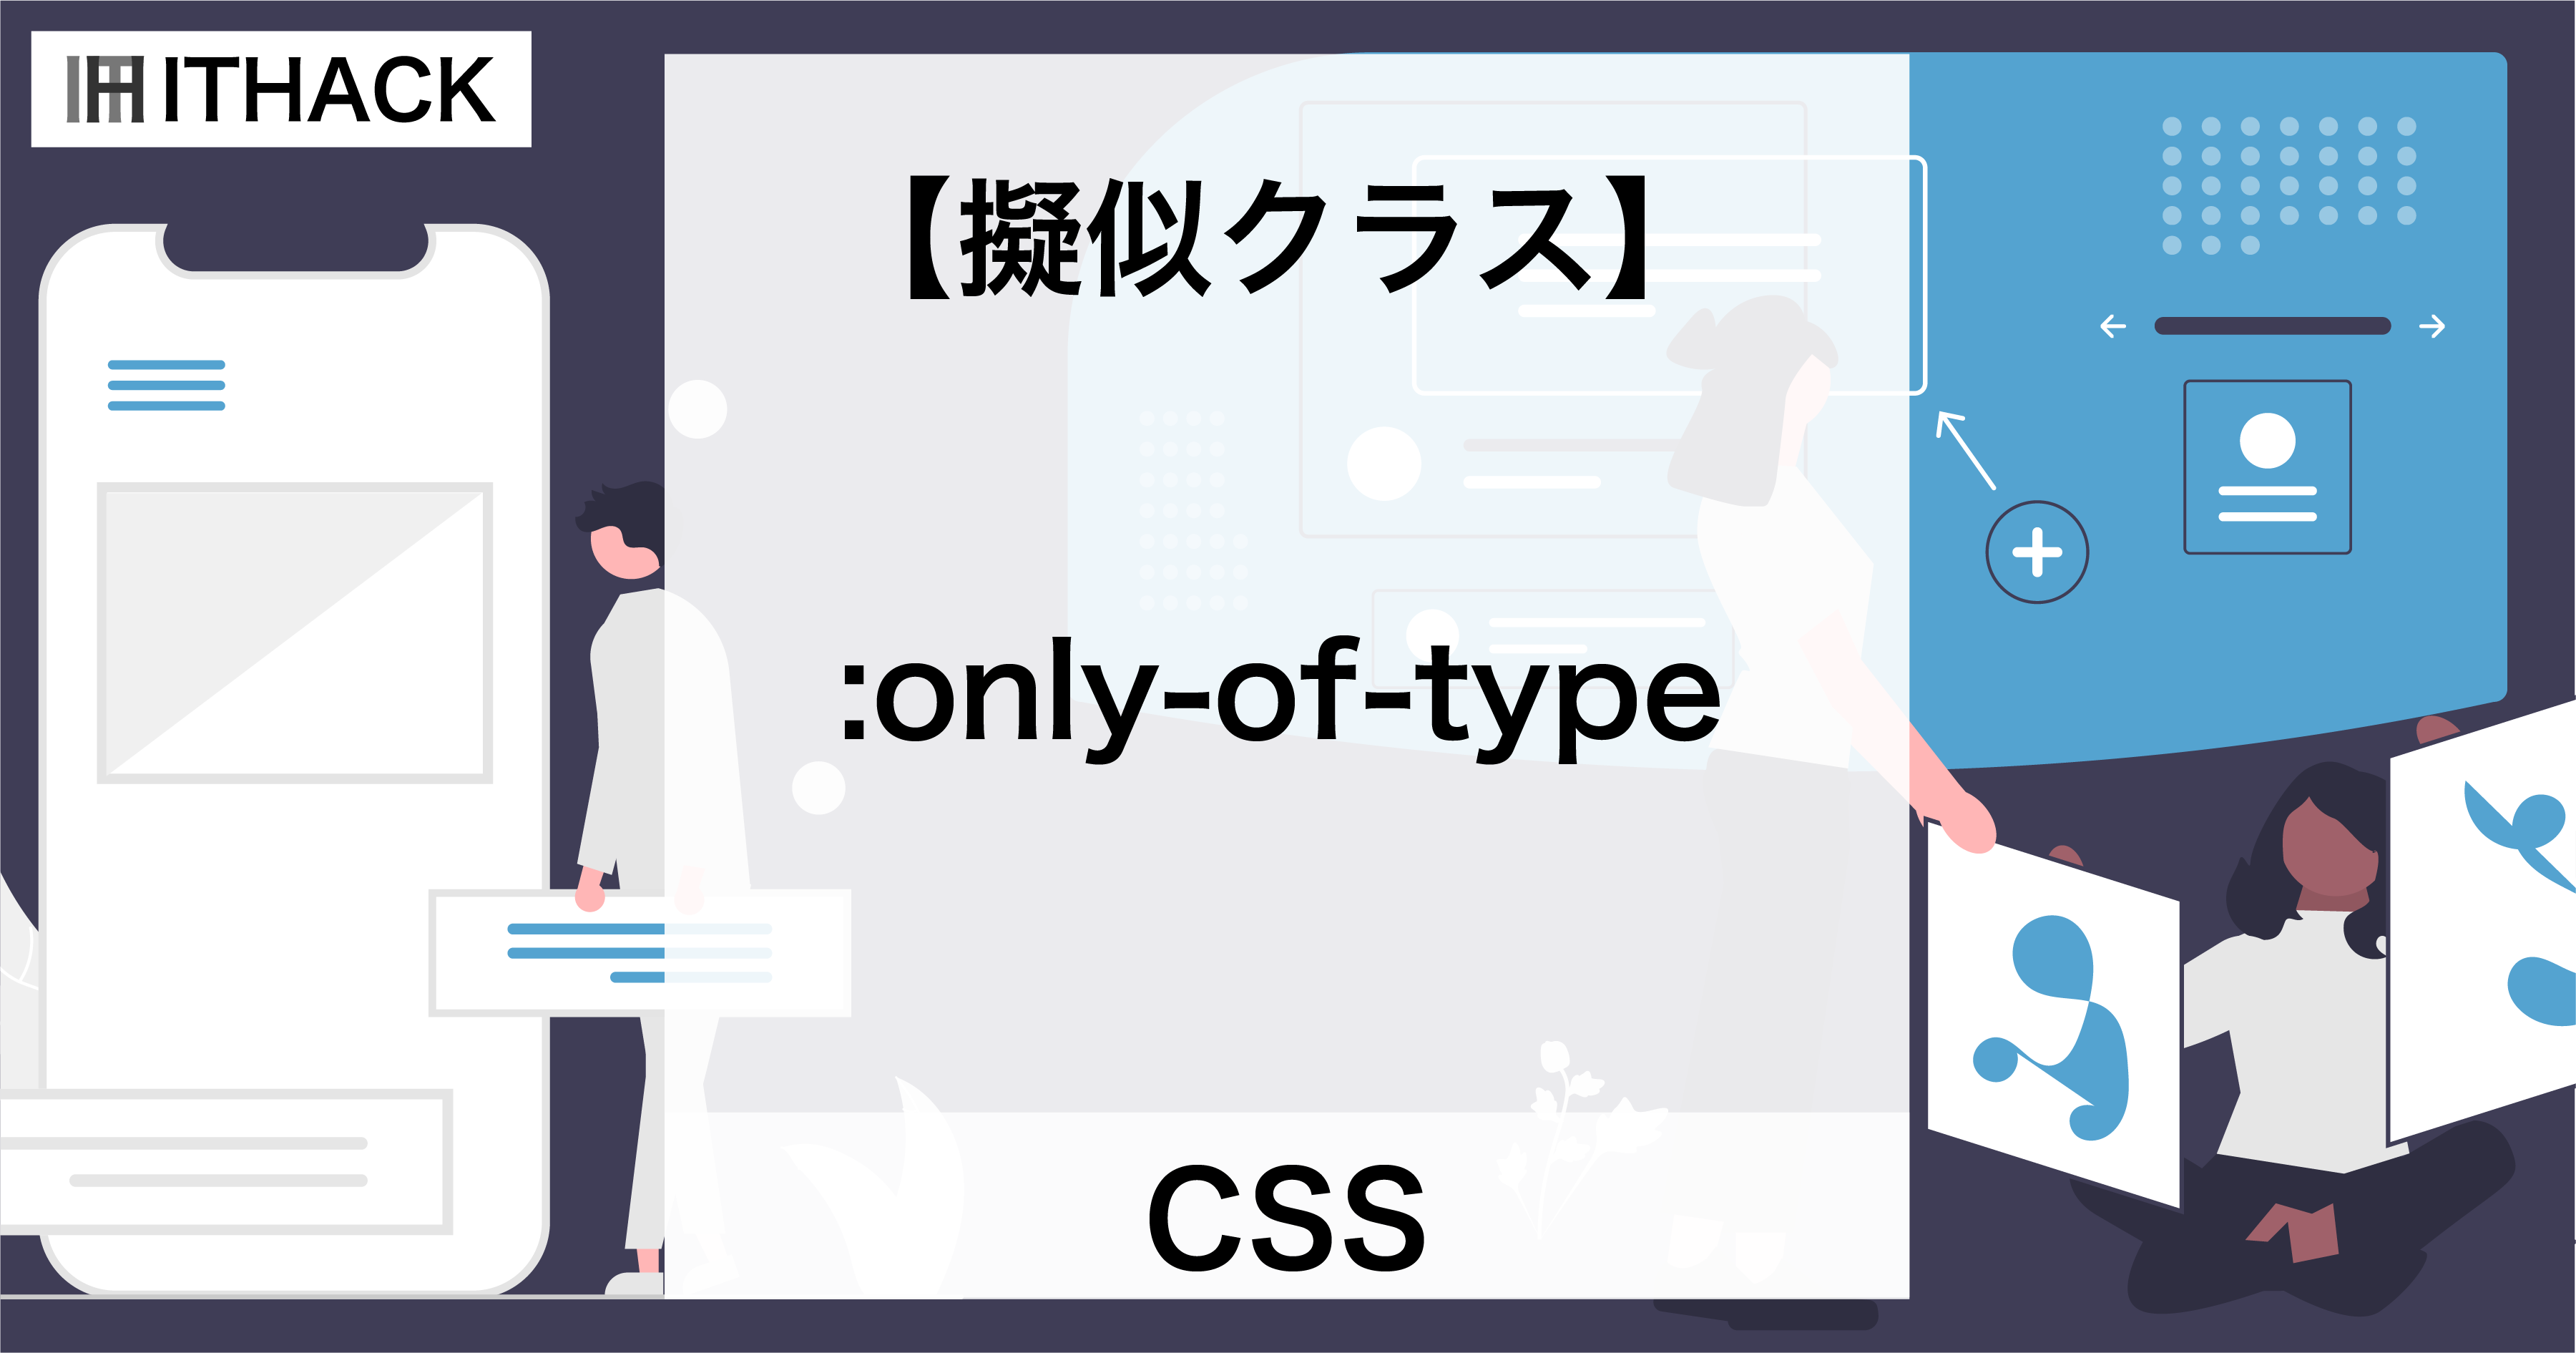 【CSS】:only-of-type（擬似クラス） - １つのみの特定要素